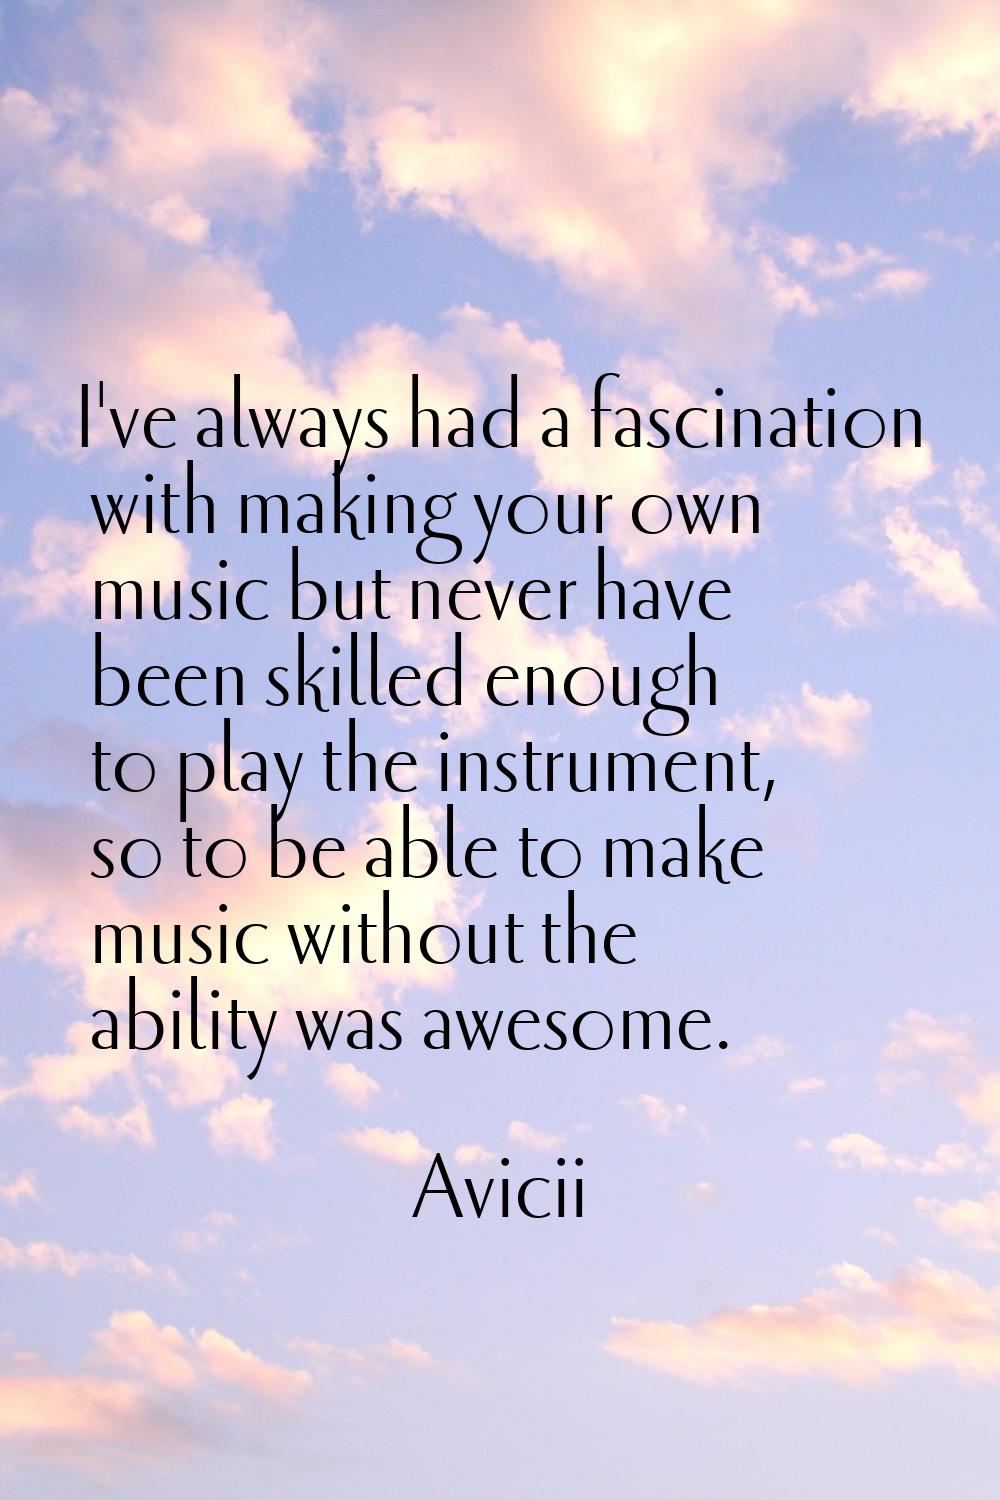 I've always had a fascination with making your own music but never have been skilled enough to play